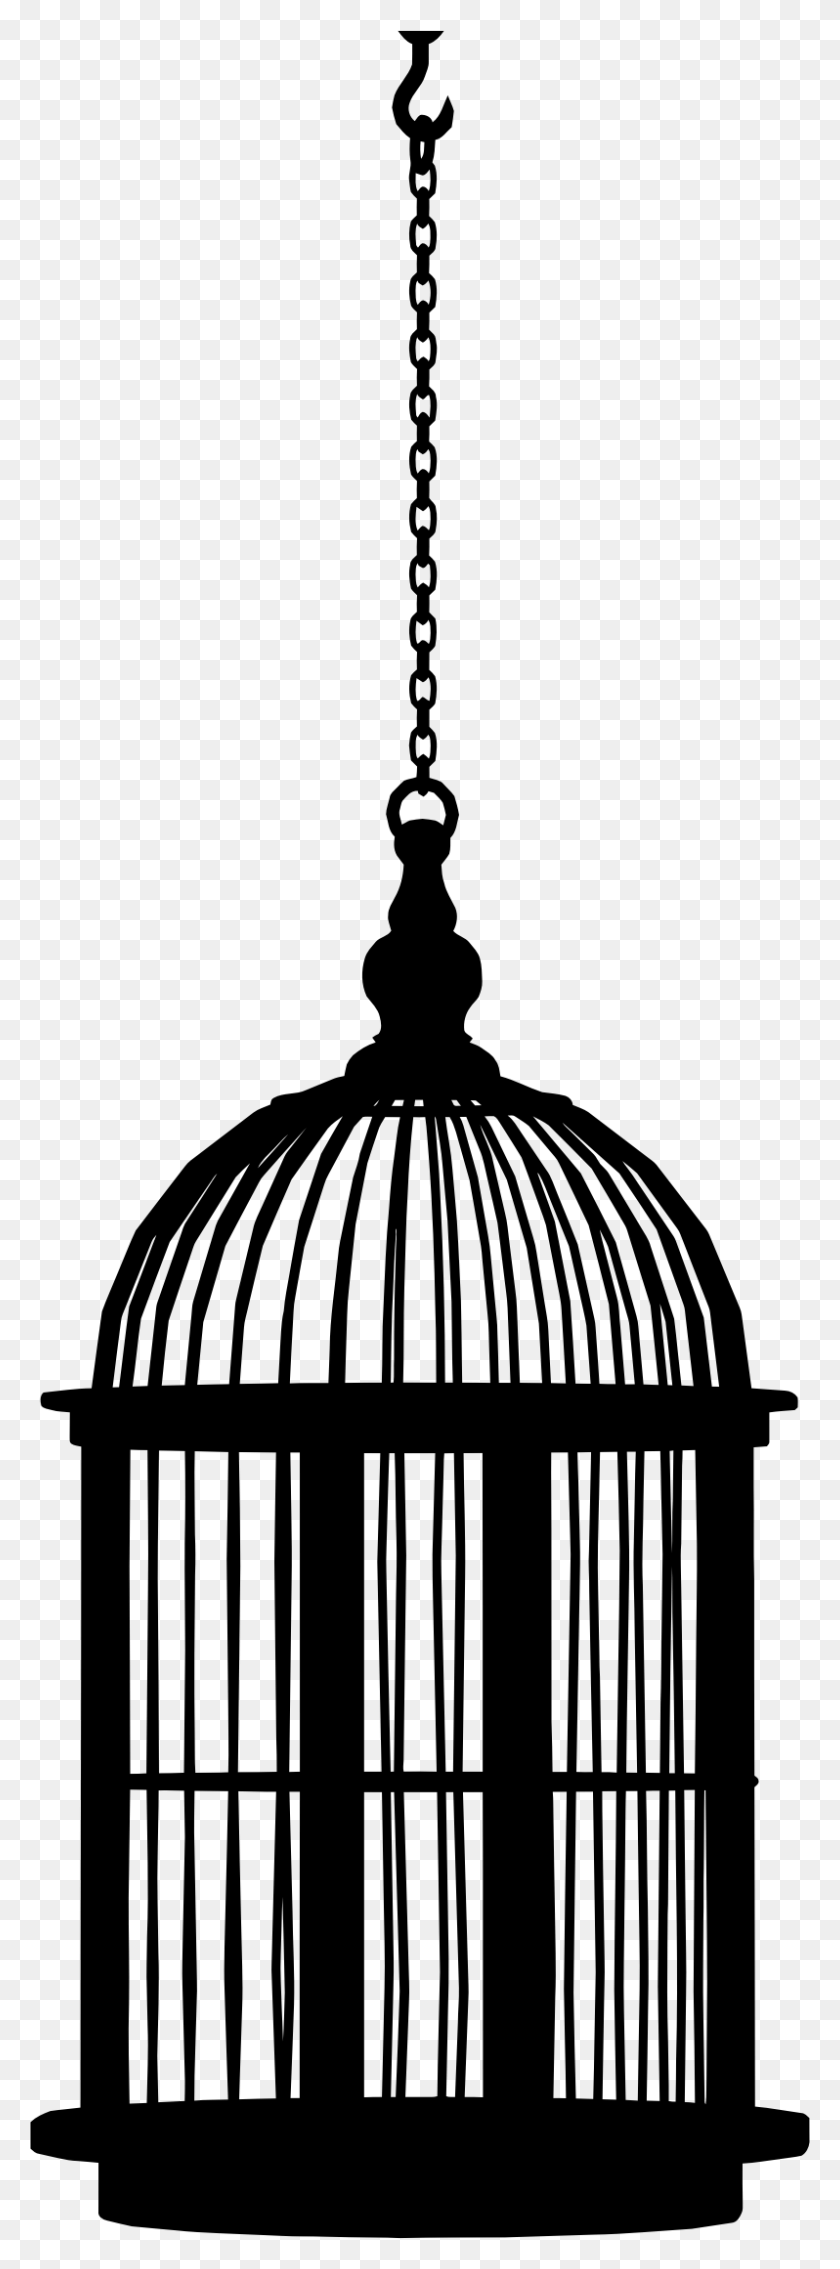 798x2260 This Free Icons Design Of Hanging Bird Cage Silhouette, Gray, World Of Warcraft Hd Png